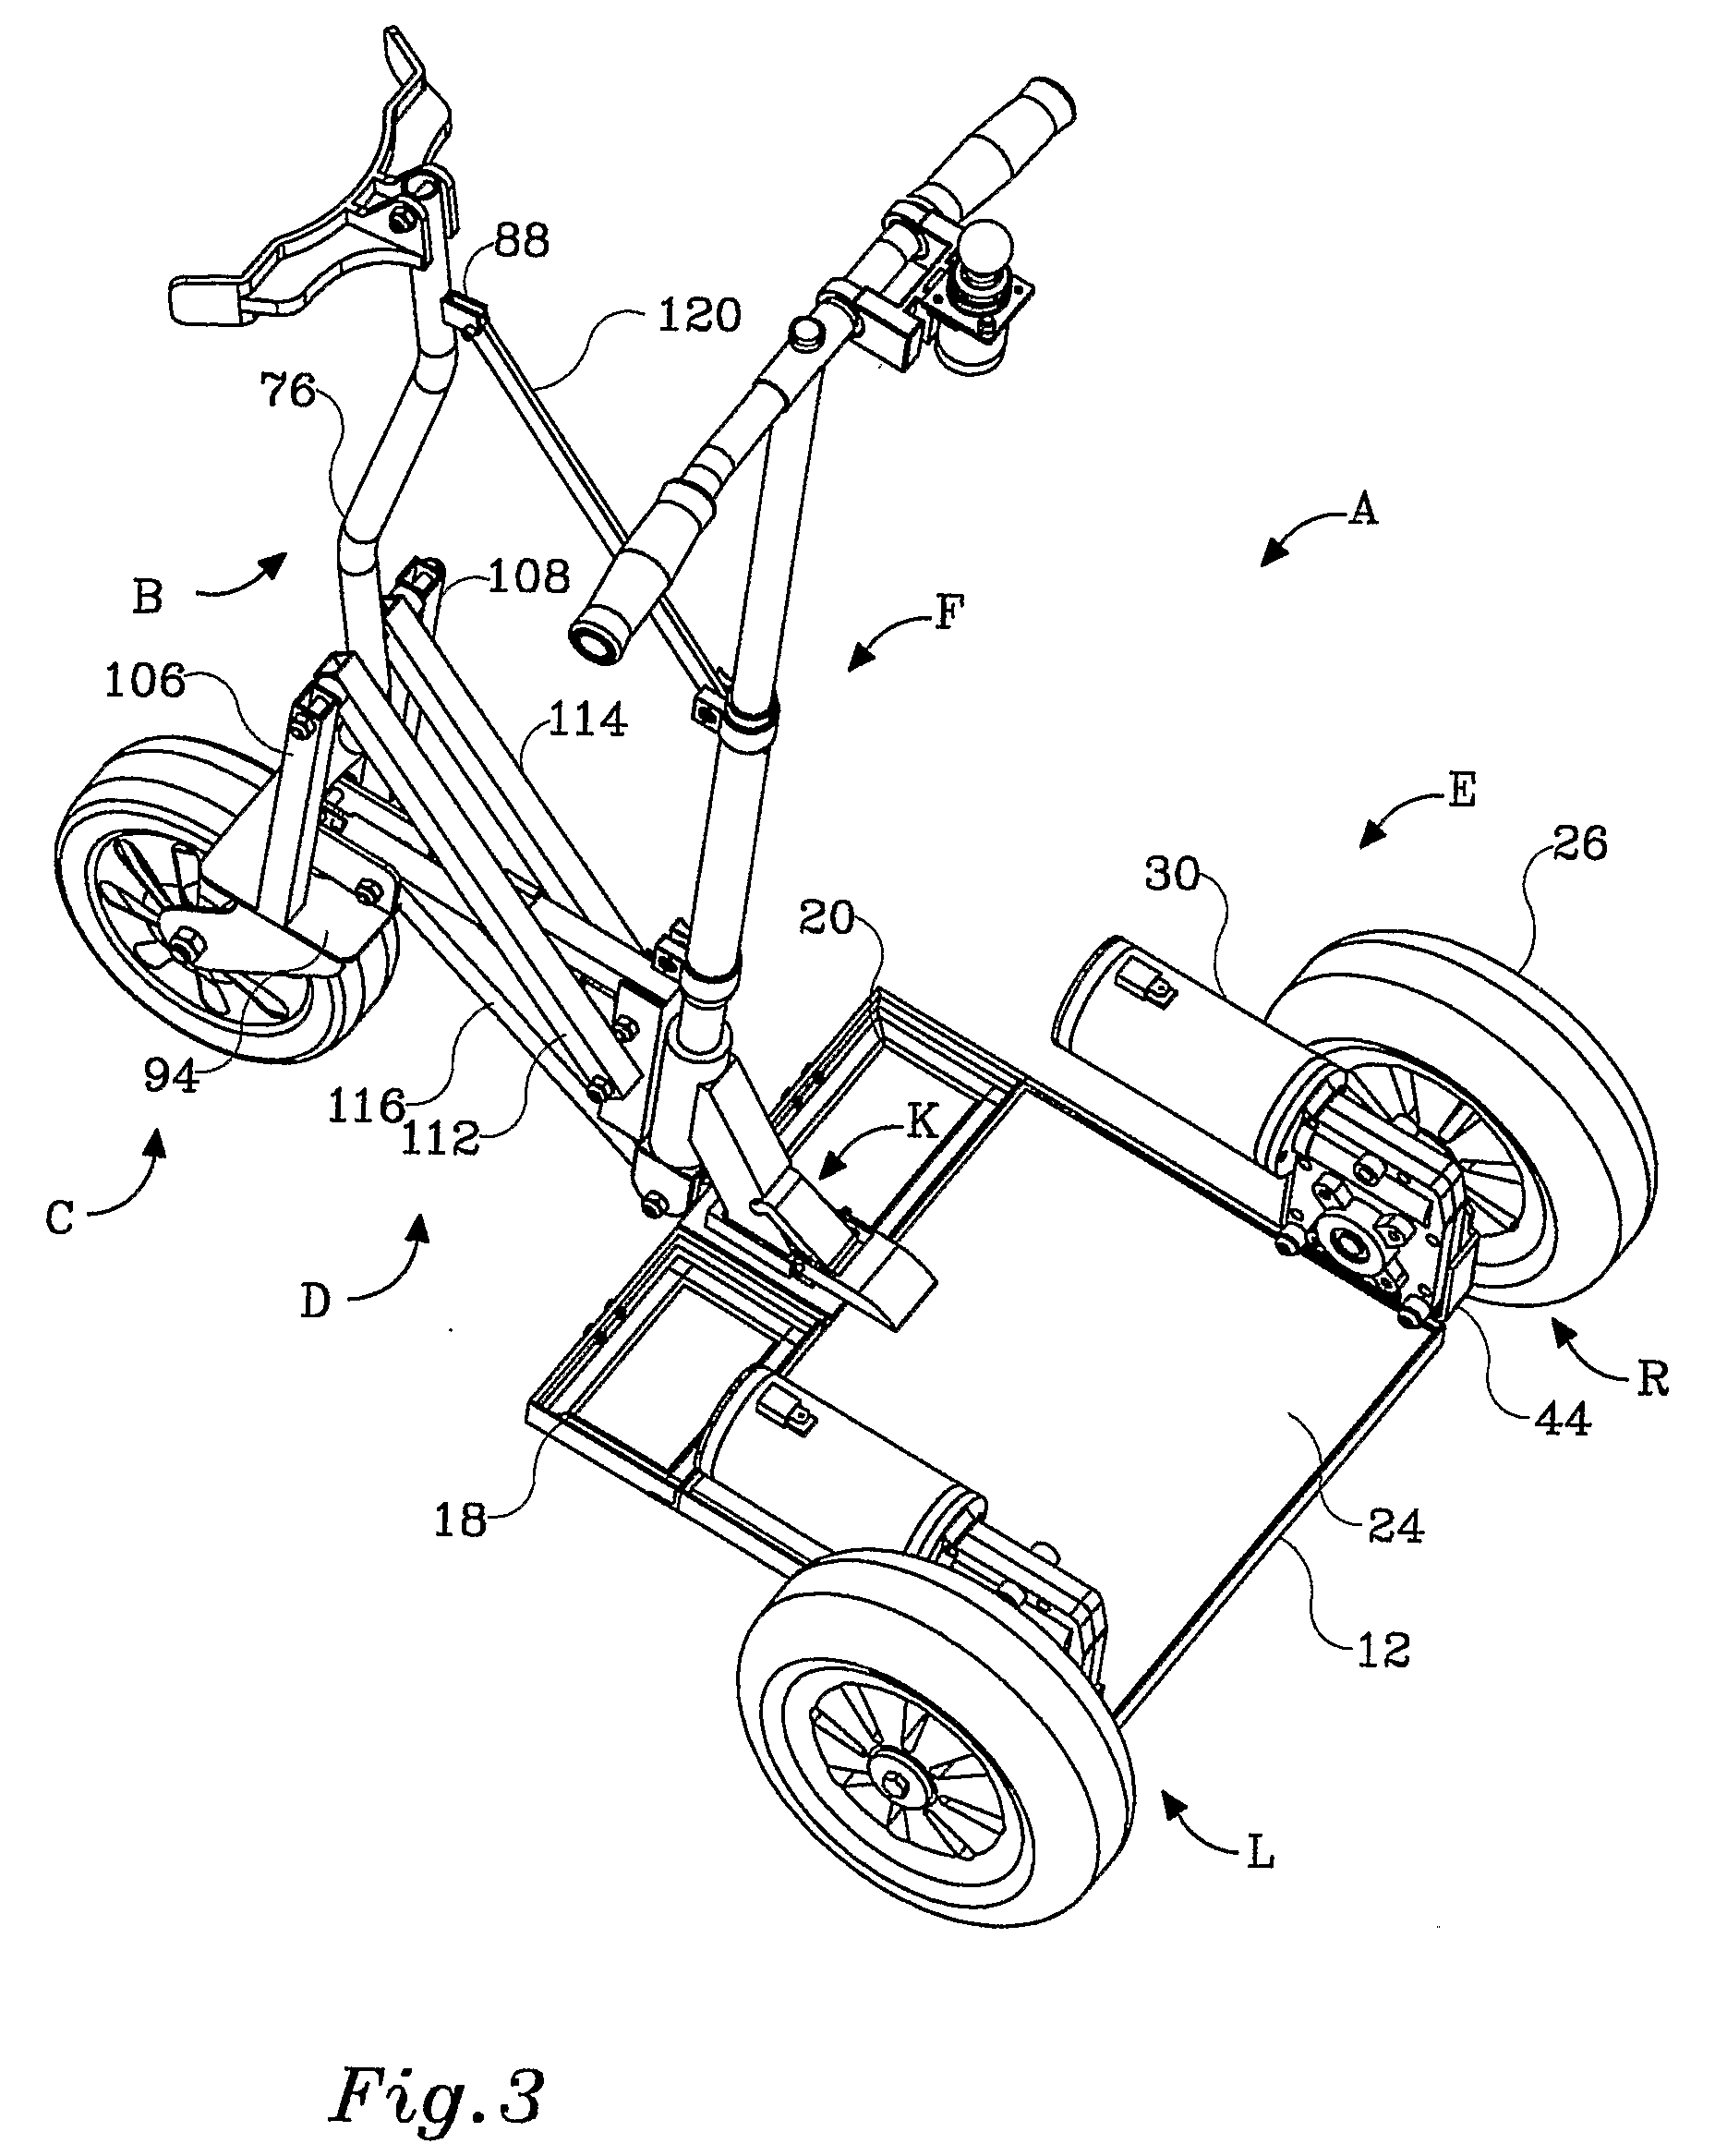 Self-Powered Vehicle With Selectable Operational Modes